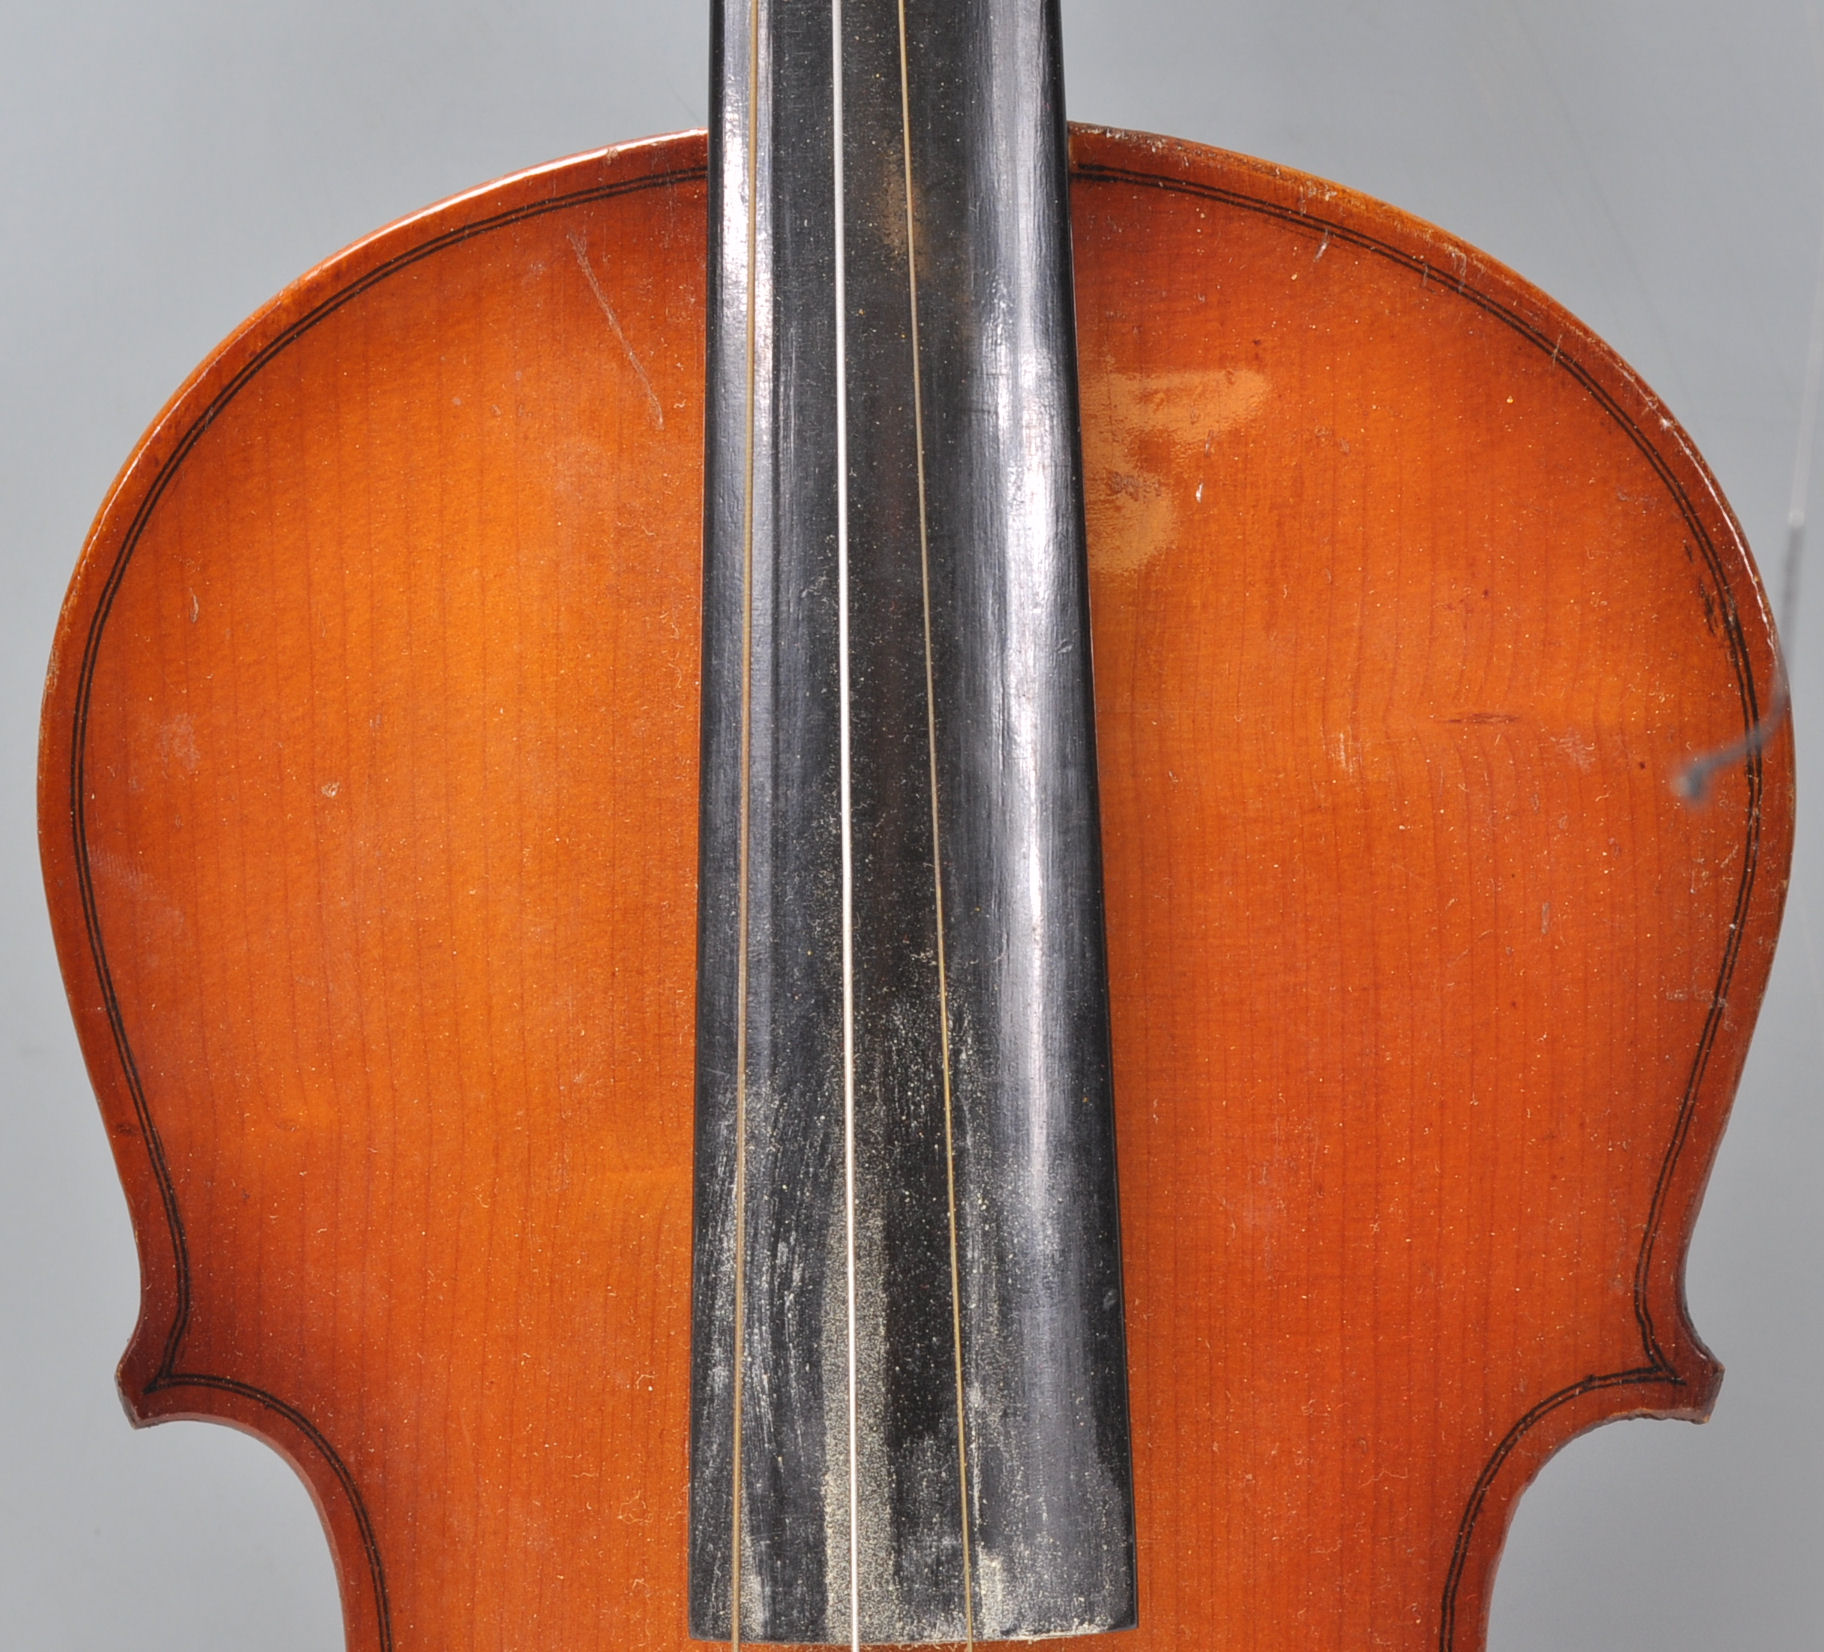 A 20th Century full size violin with two piece bac - Image 12 of 18